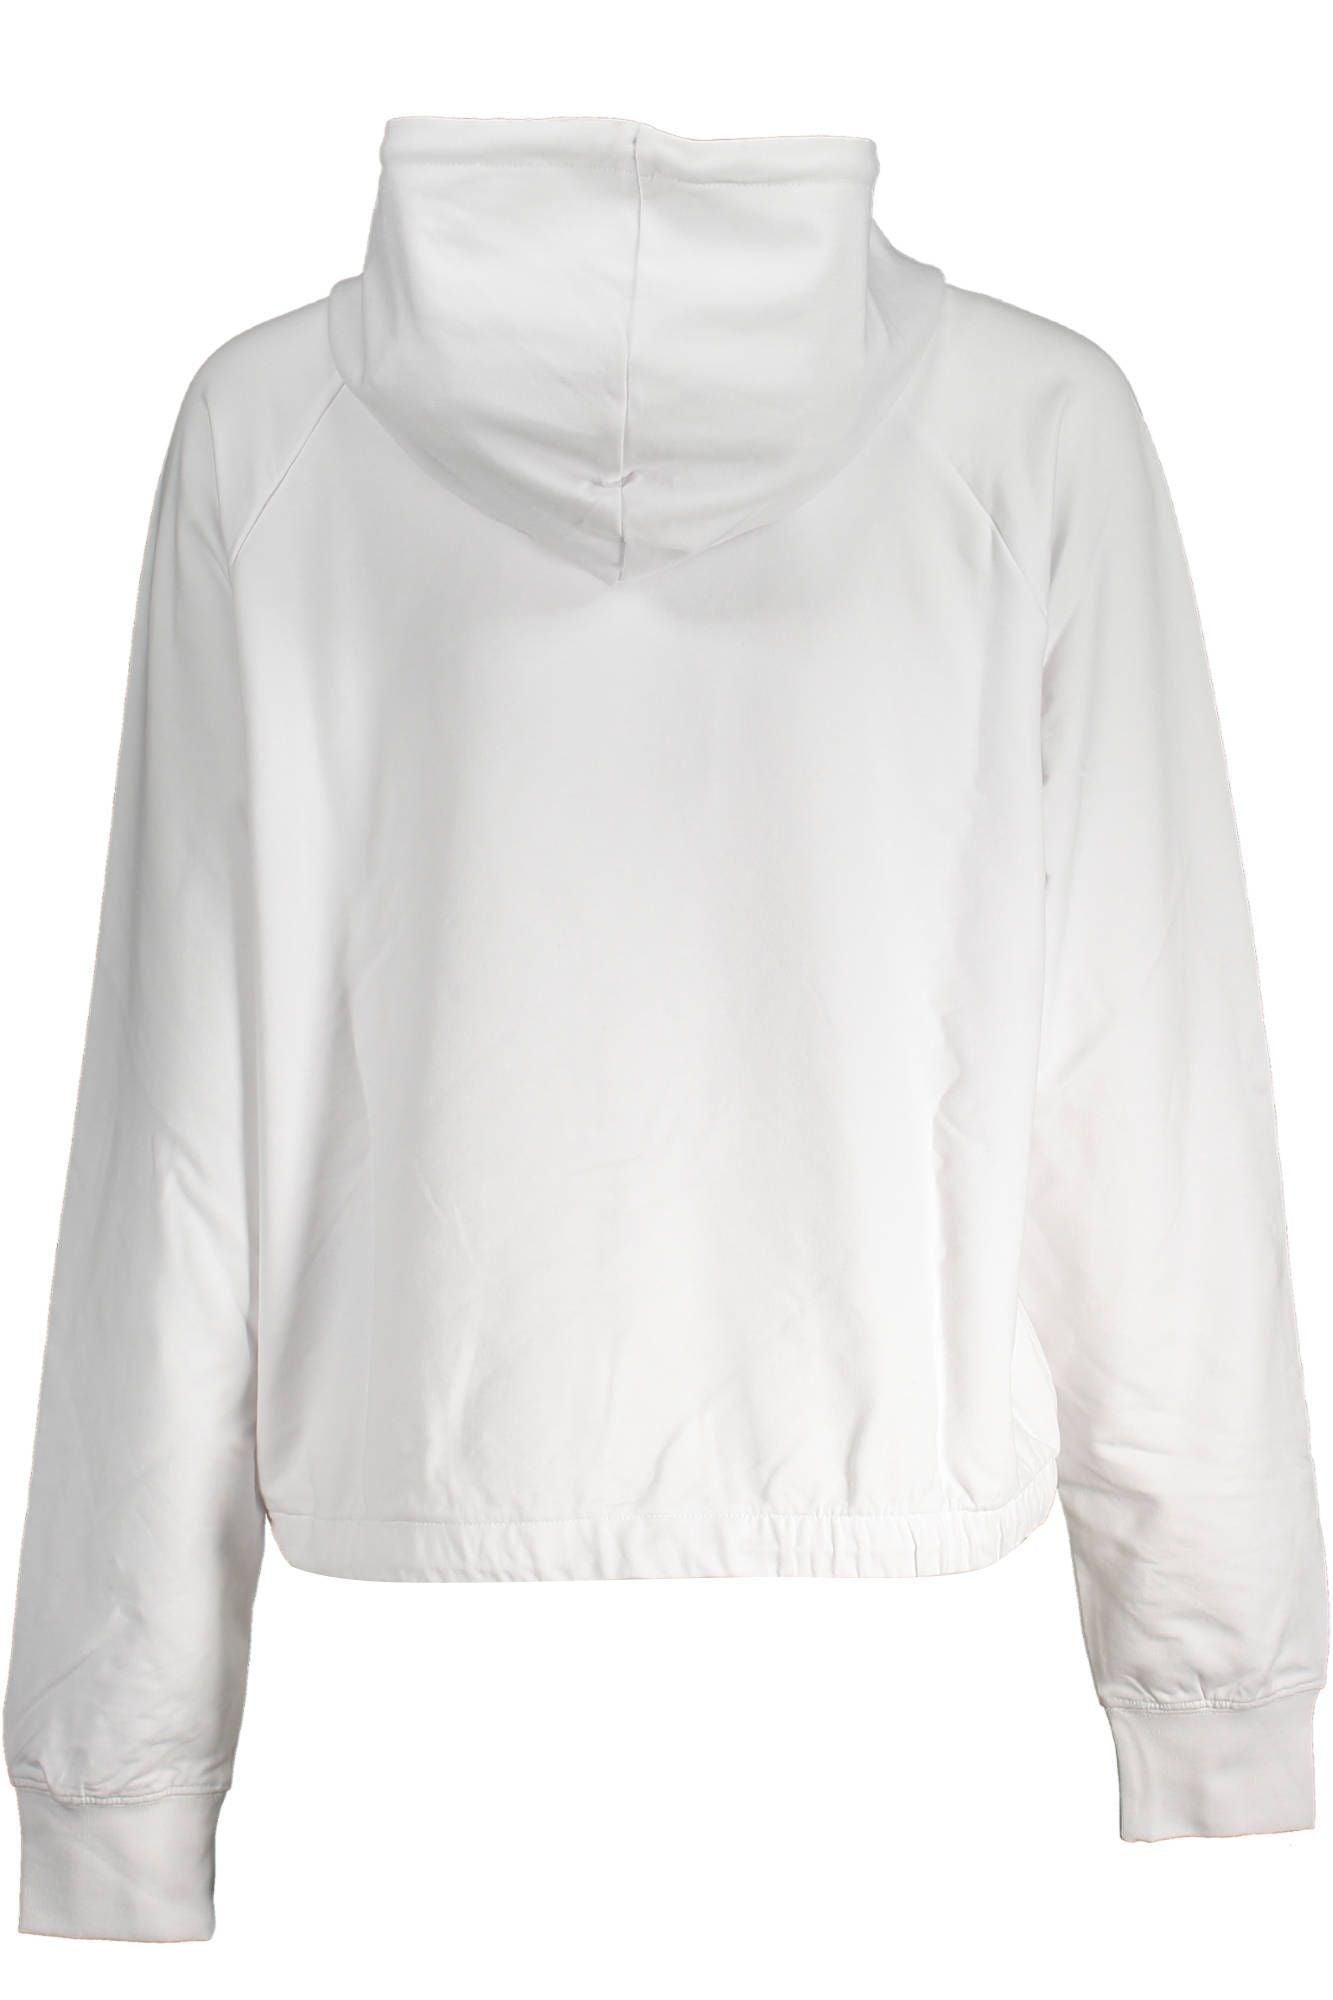 Fila Classic White Hooded Sweatshirt with Embroidery - PER.FASHION